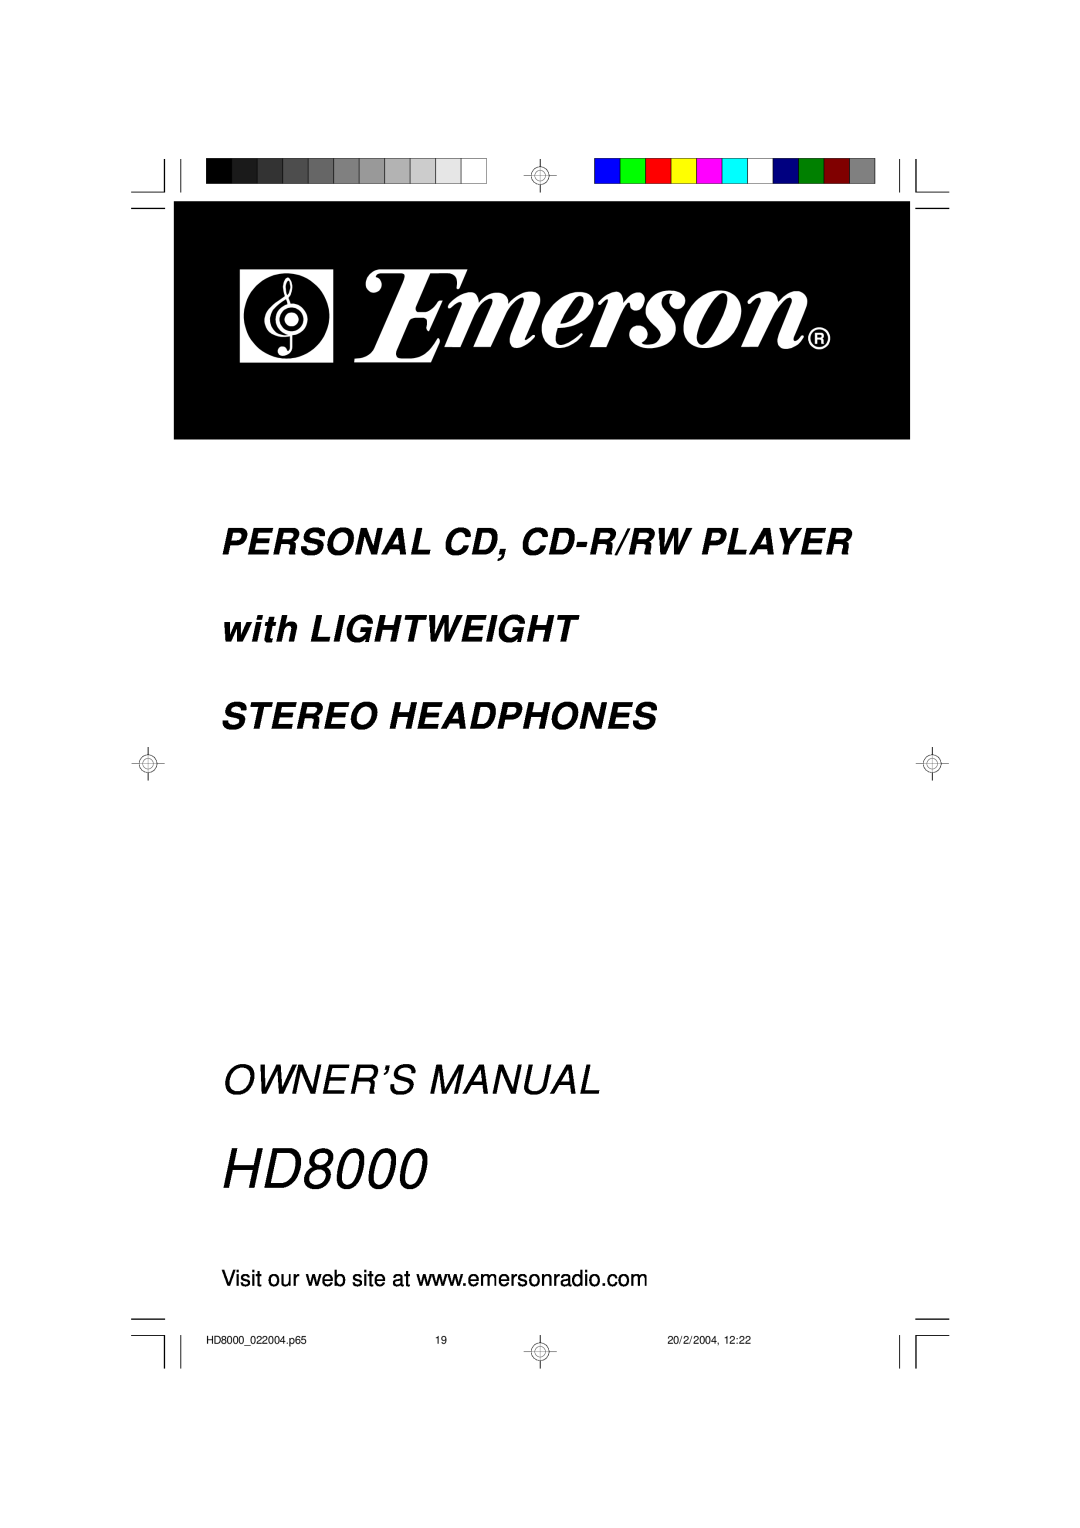 Emerson owner manual PERSONAL CD, CD-R/RWPLAYER with LIGHTWEIGHT, Stereo Headphones, HD8000 022004.p65, 20/2/2004 